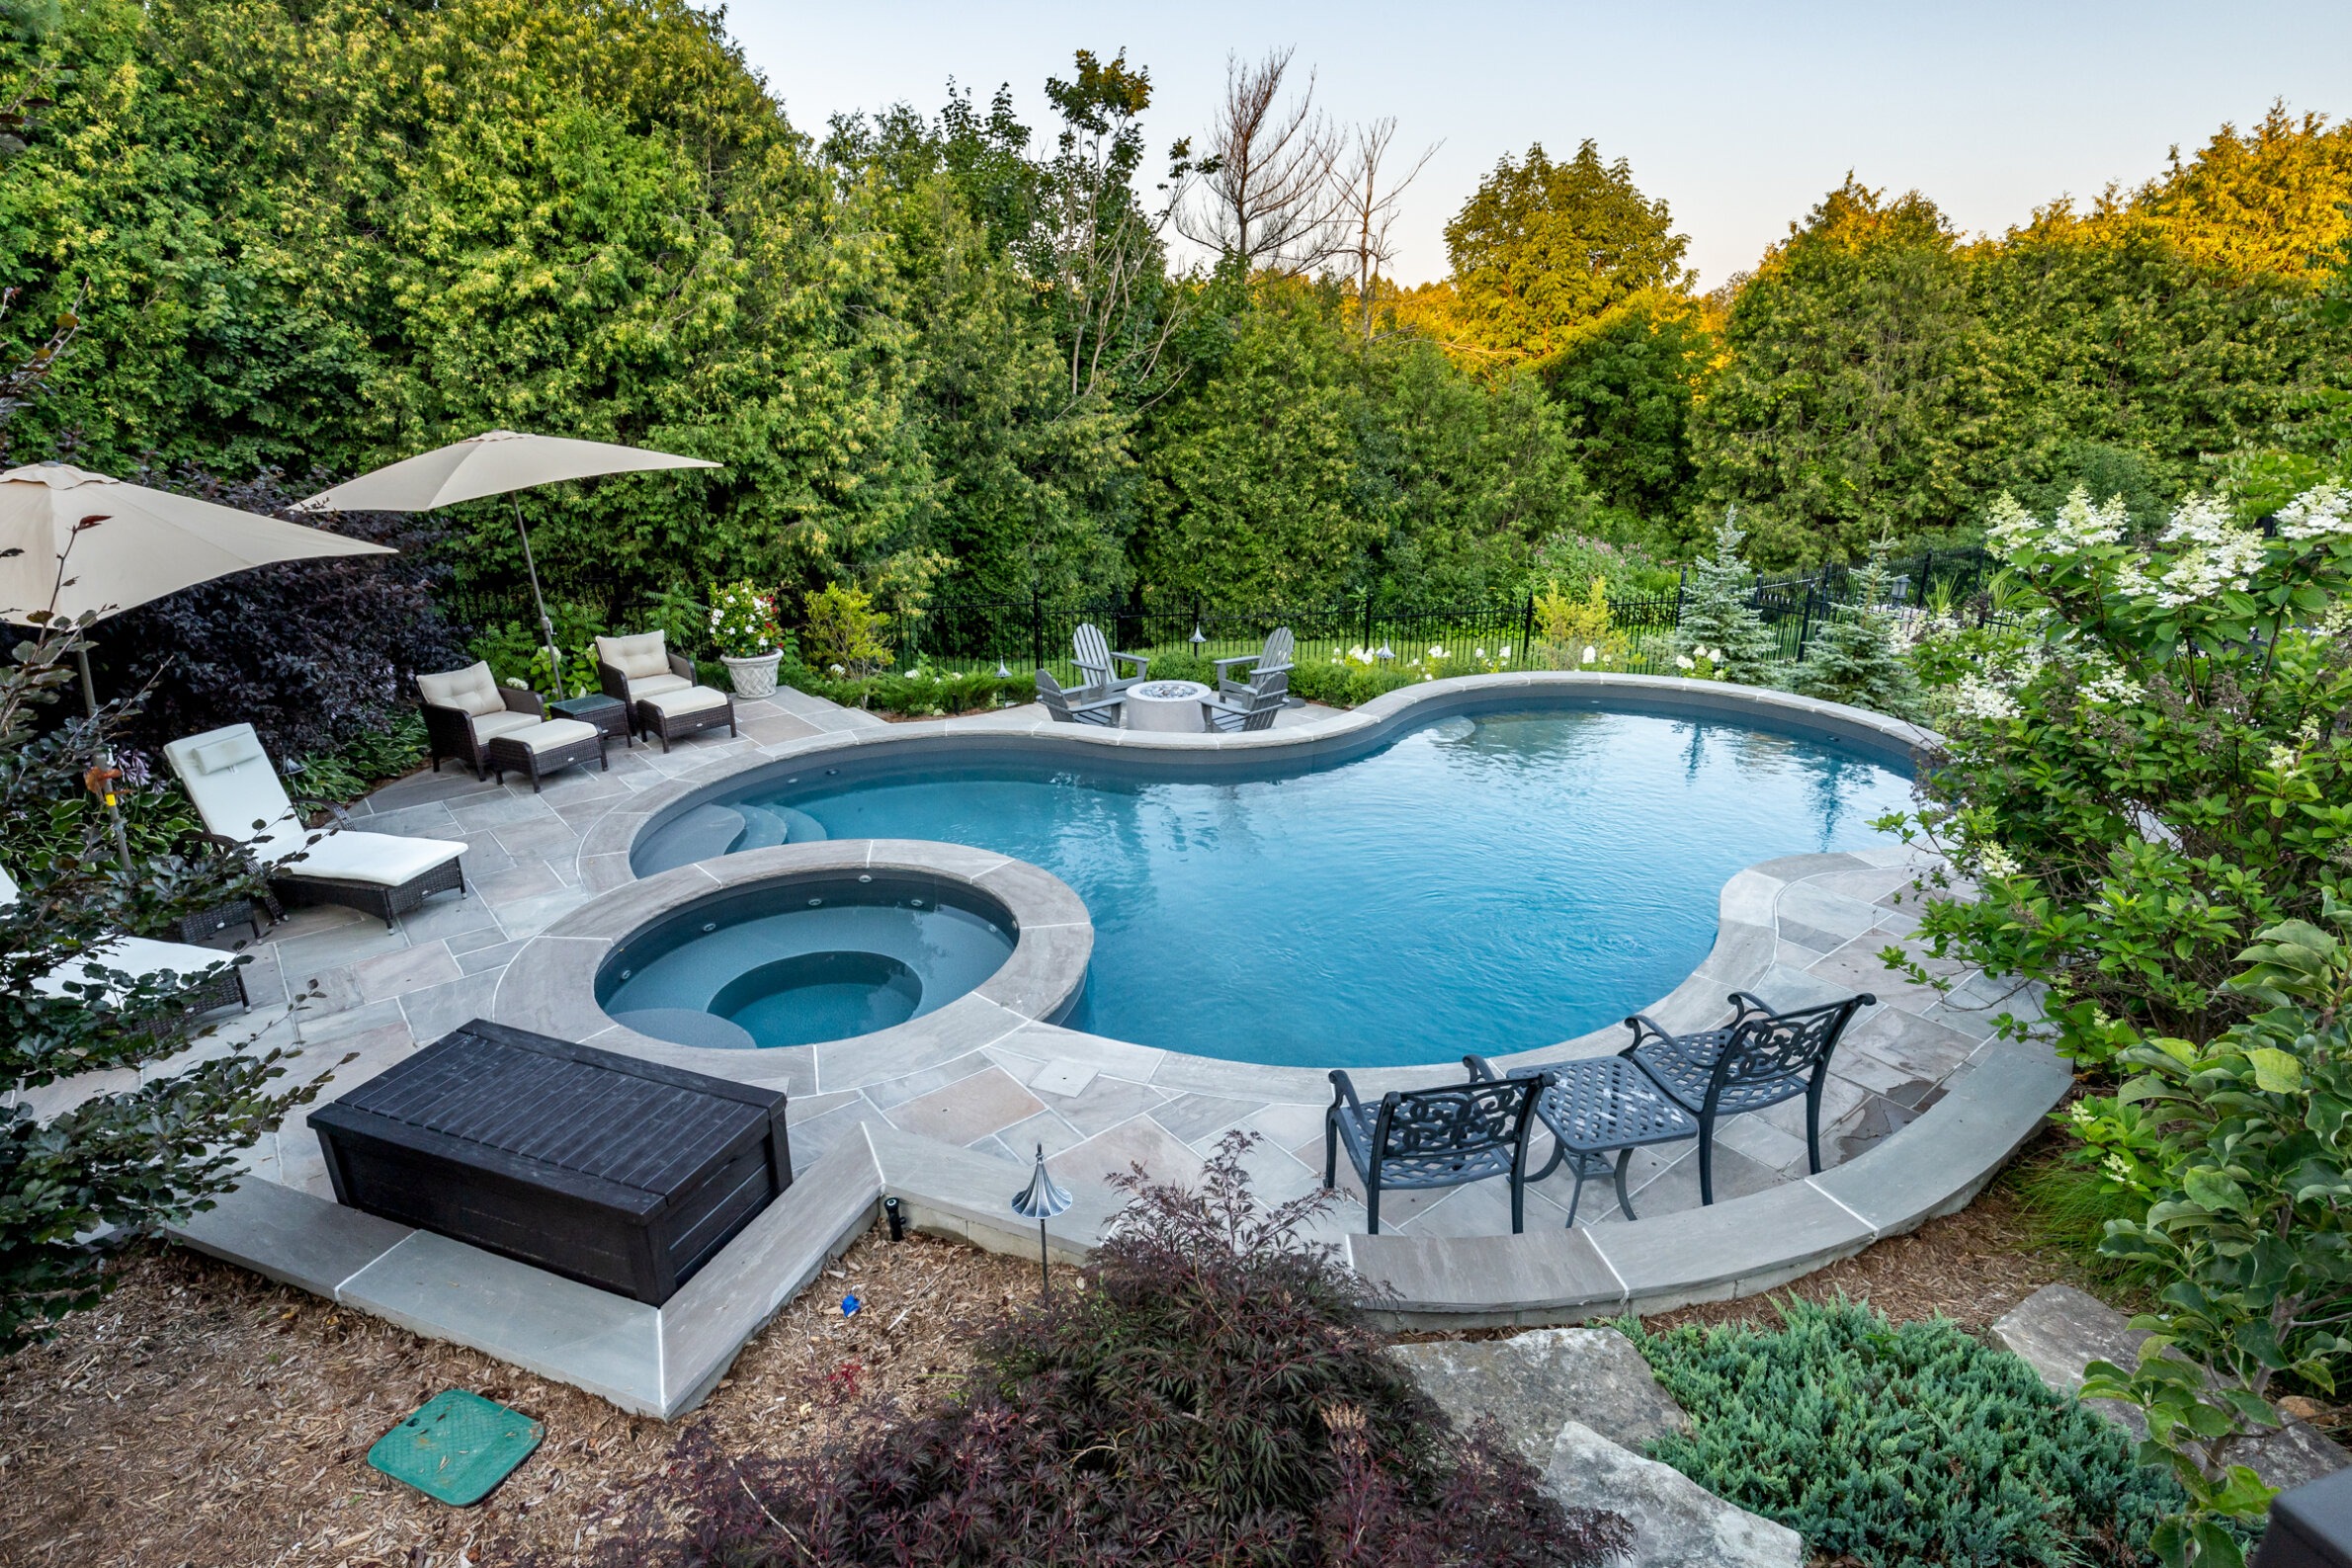 This image shows an outdoor residential swimming pool with a hot tub, surrounded by patio furniture, greenery, and a clear blue sky above.